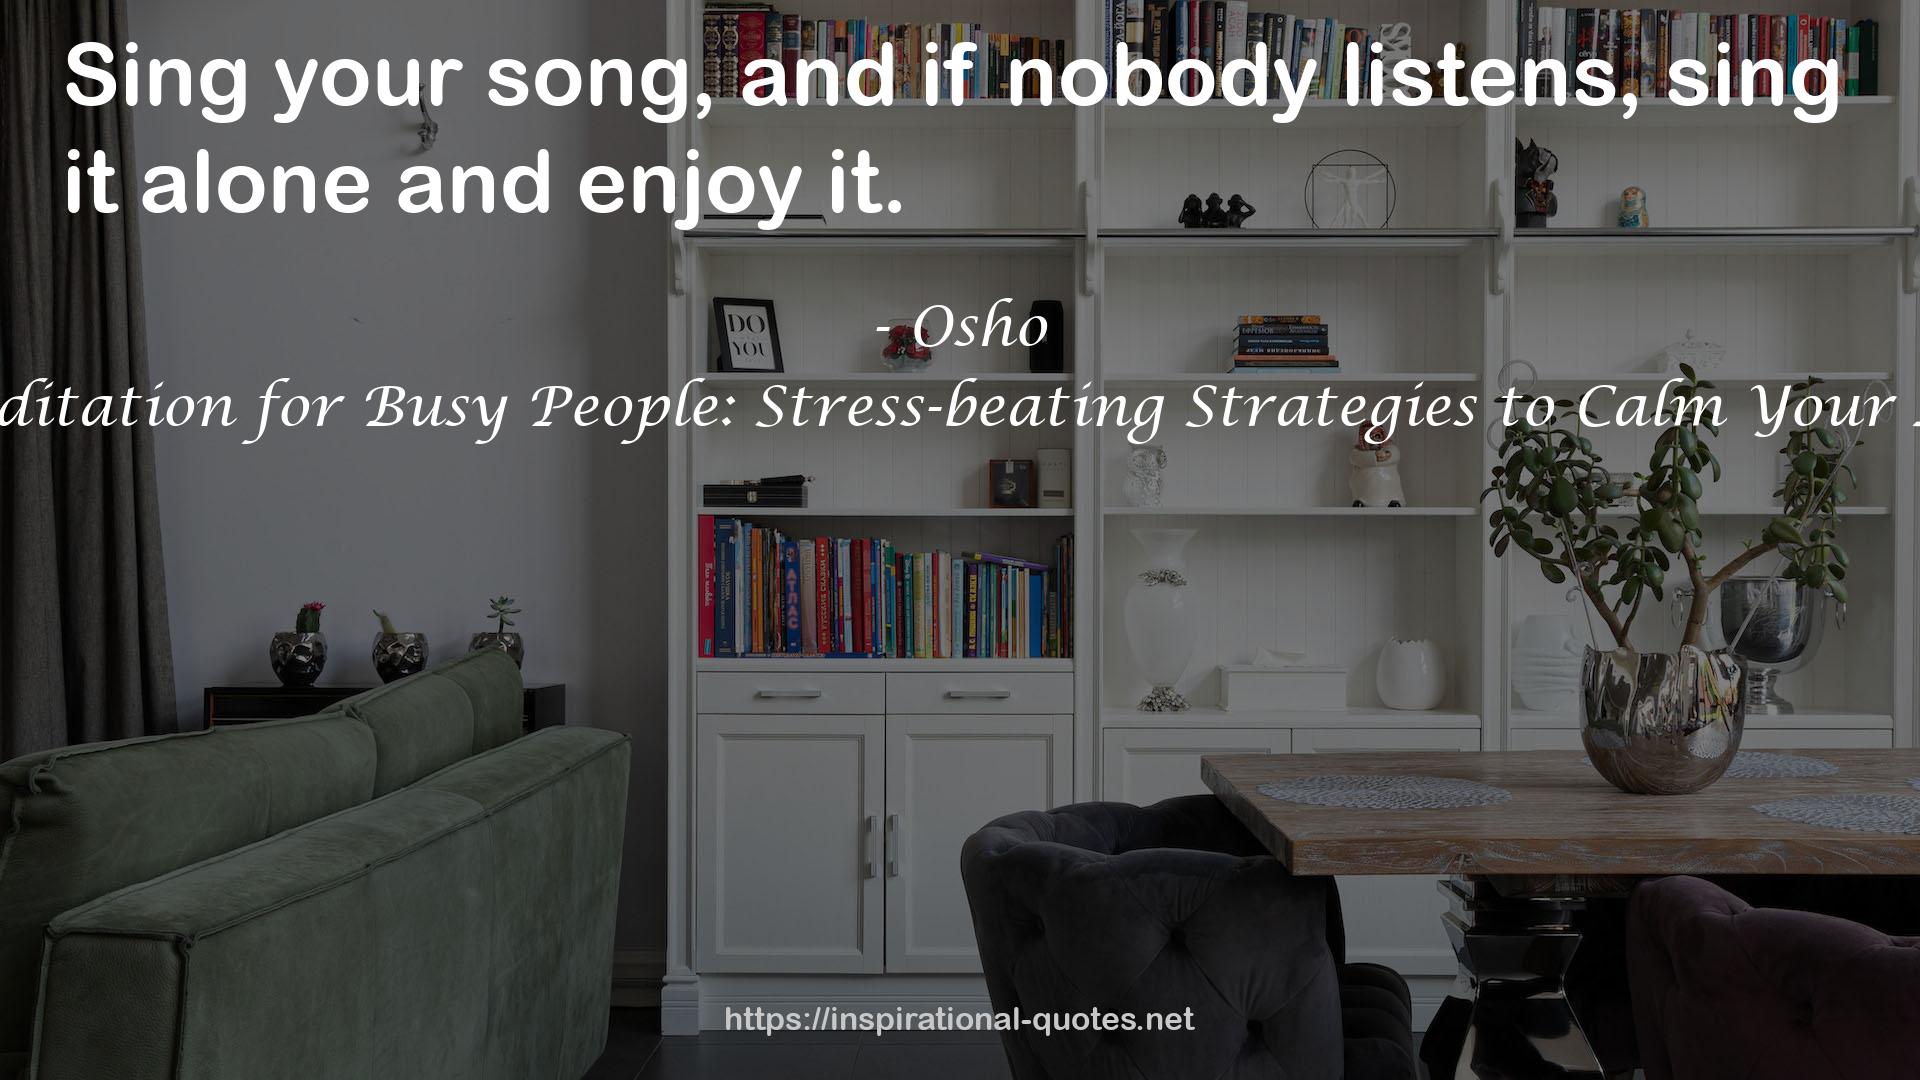 Meditation for Busy People: Stress-beating Strategies to Calm Your Life QUOTES